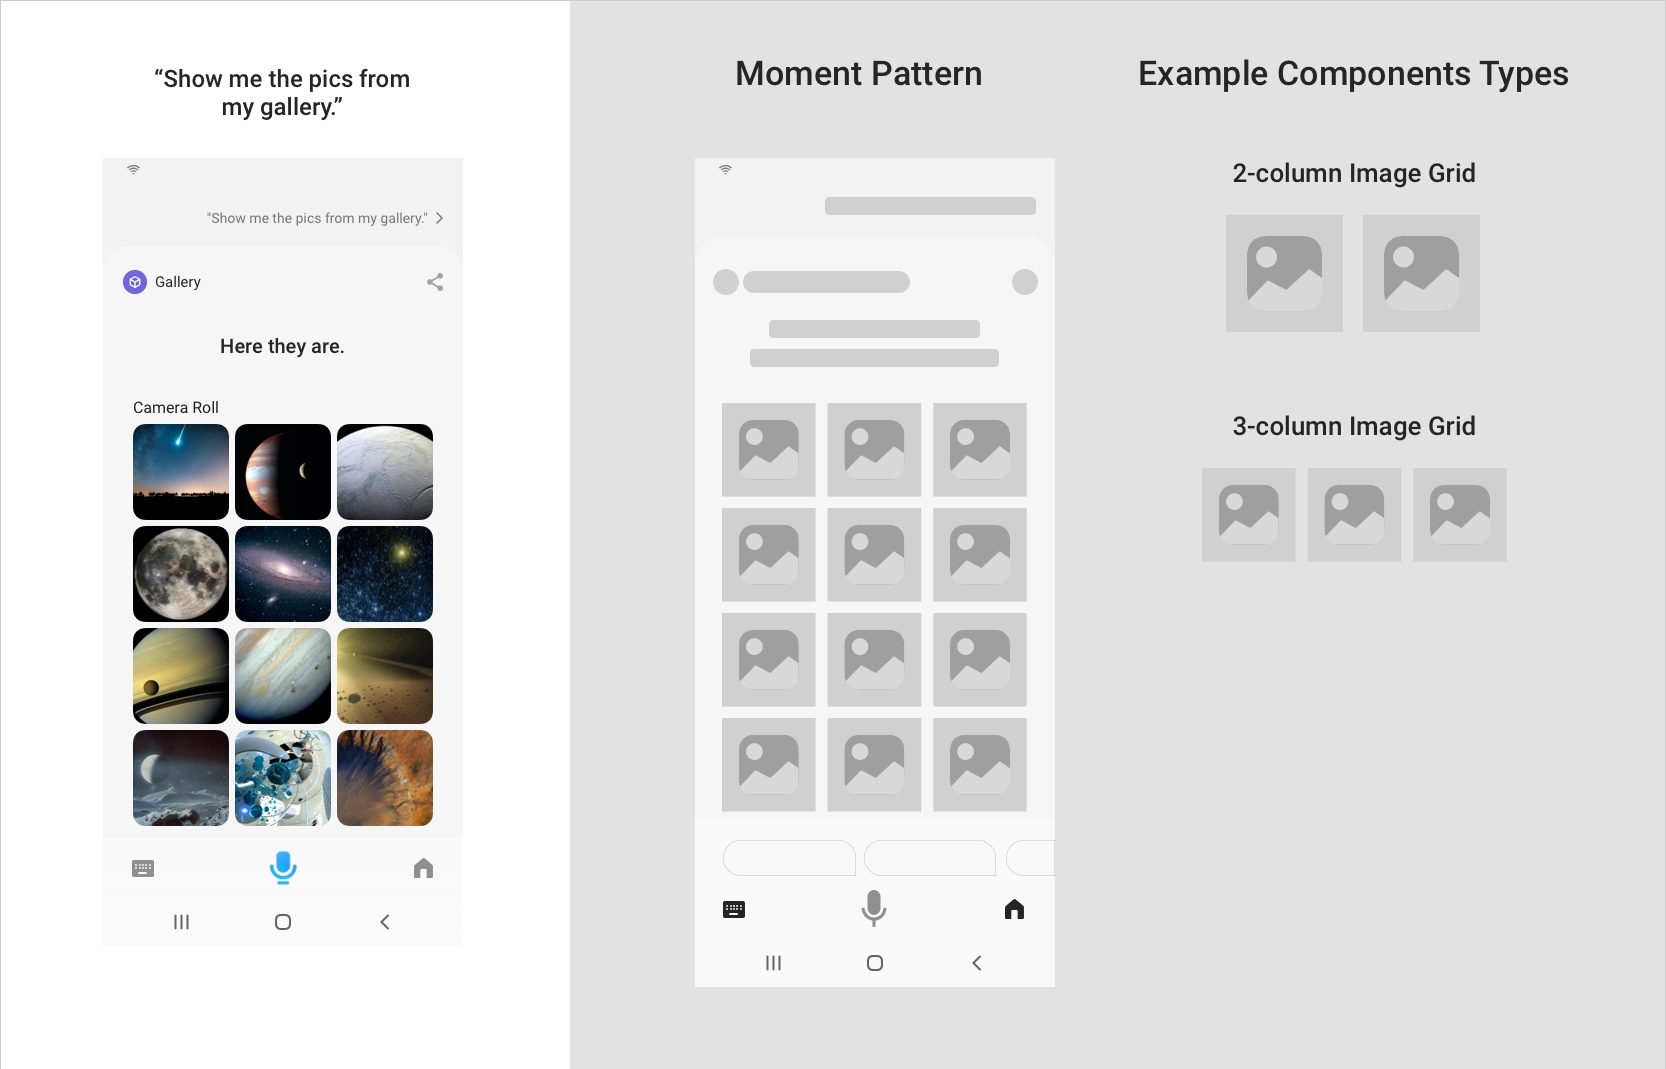 For instance, in response to the utterance "show me the pics from my Gallery", Bixby might present a 2-column or 3-column image grid.